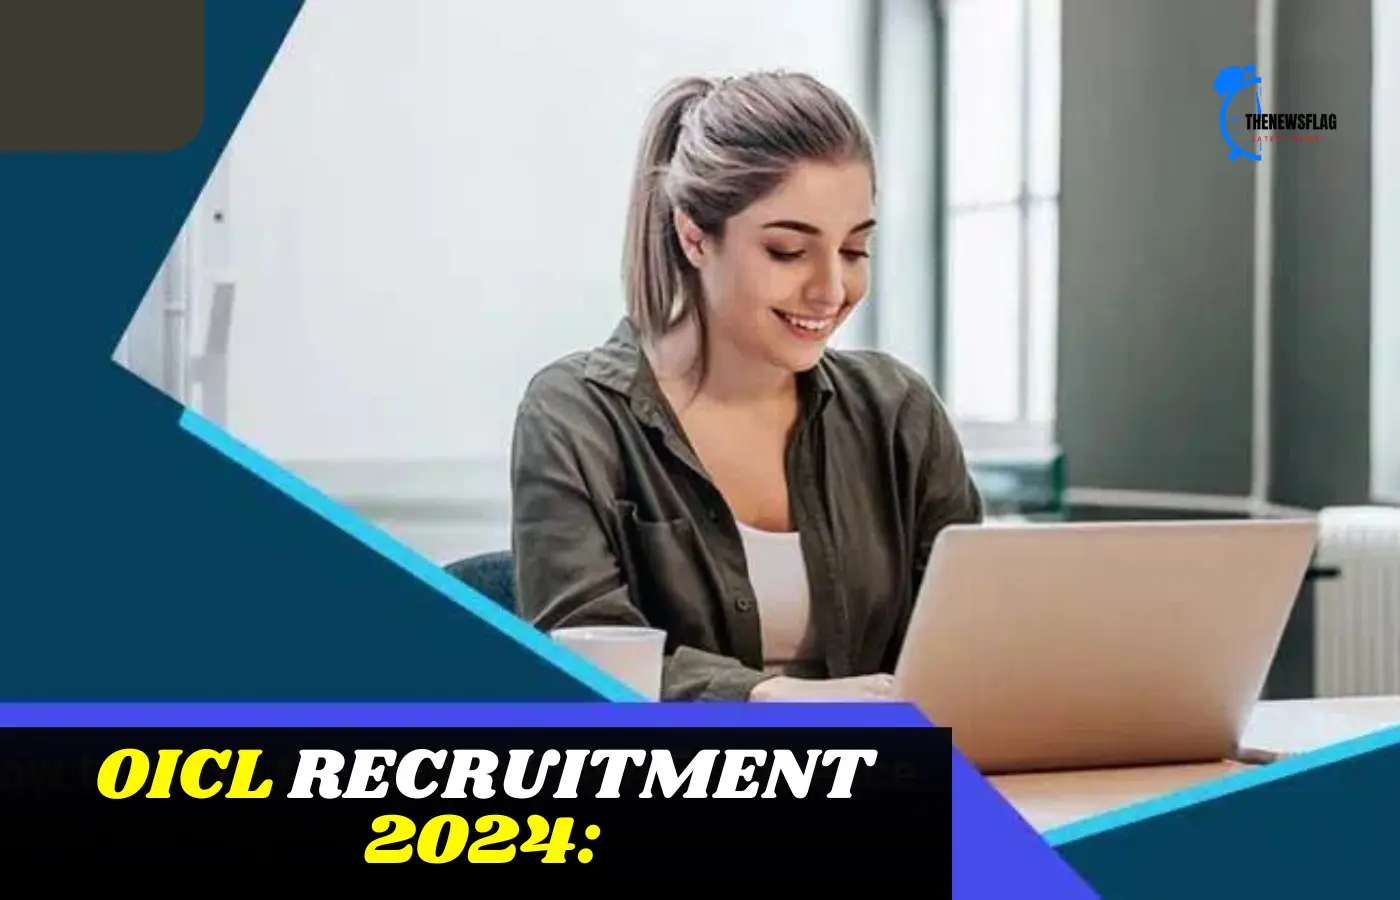 OICL Recruitment 2024: Visit orientalinsurance.org.in to register for a 100th administrative officer position.